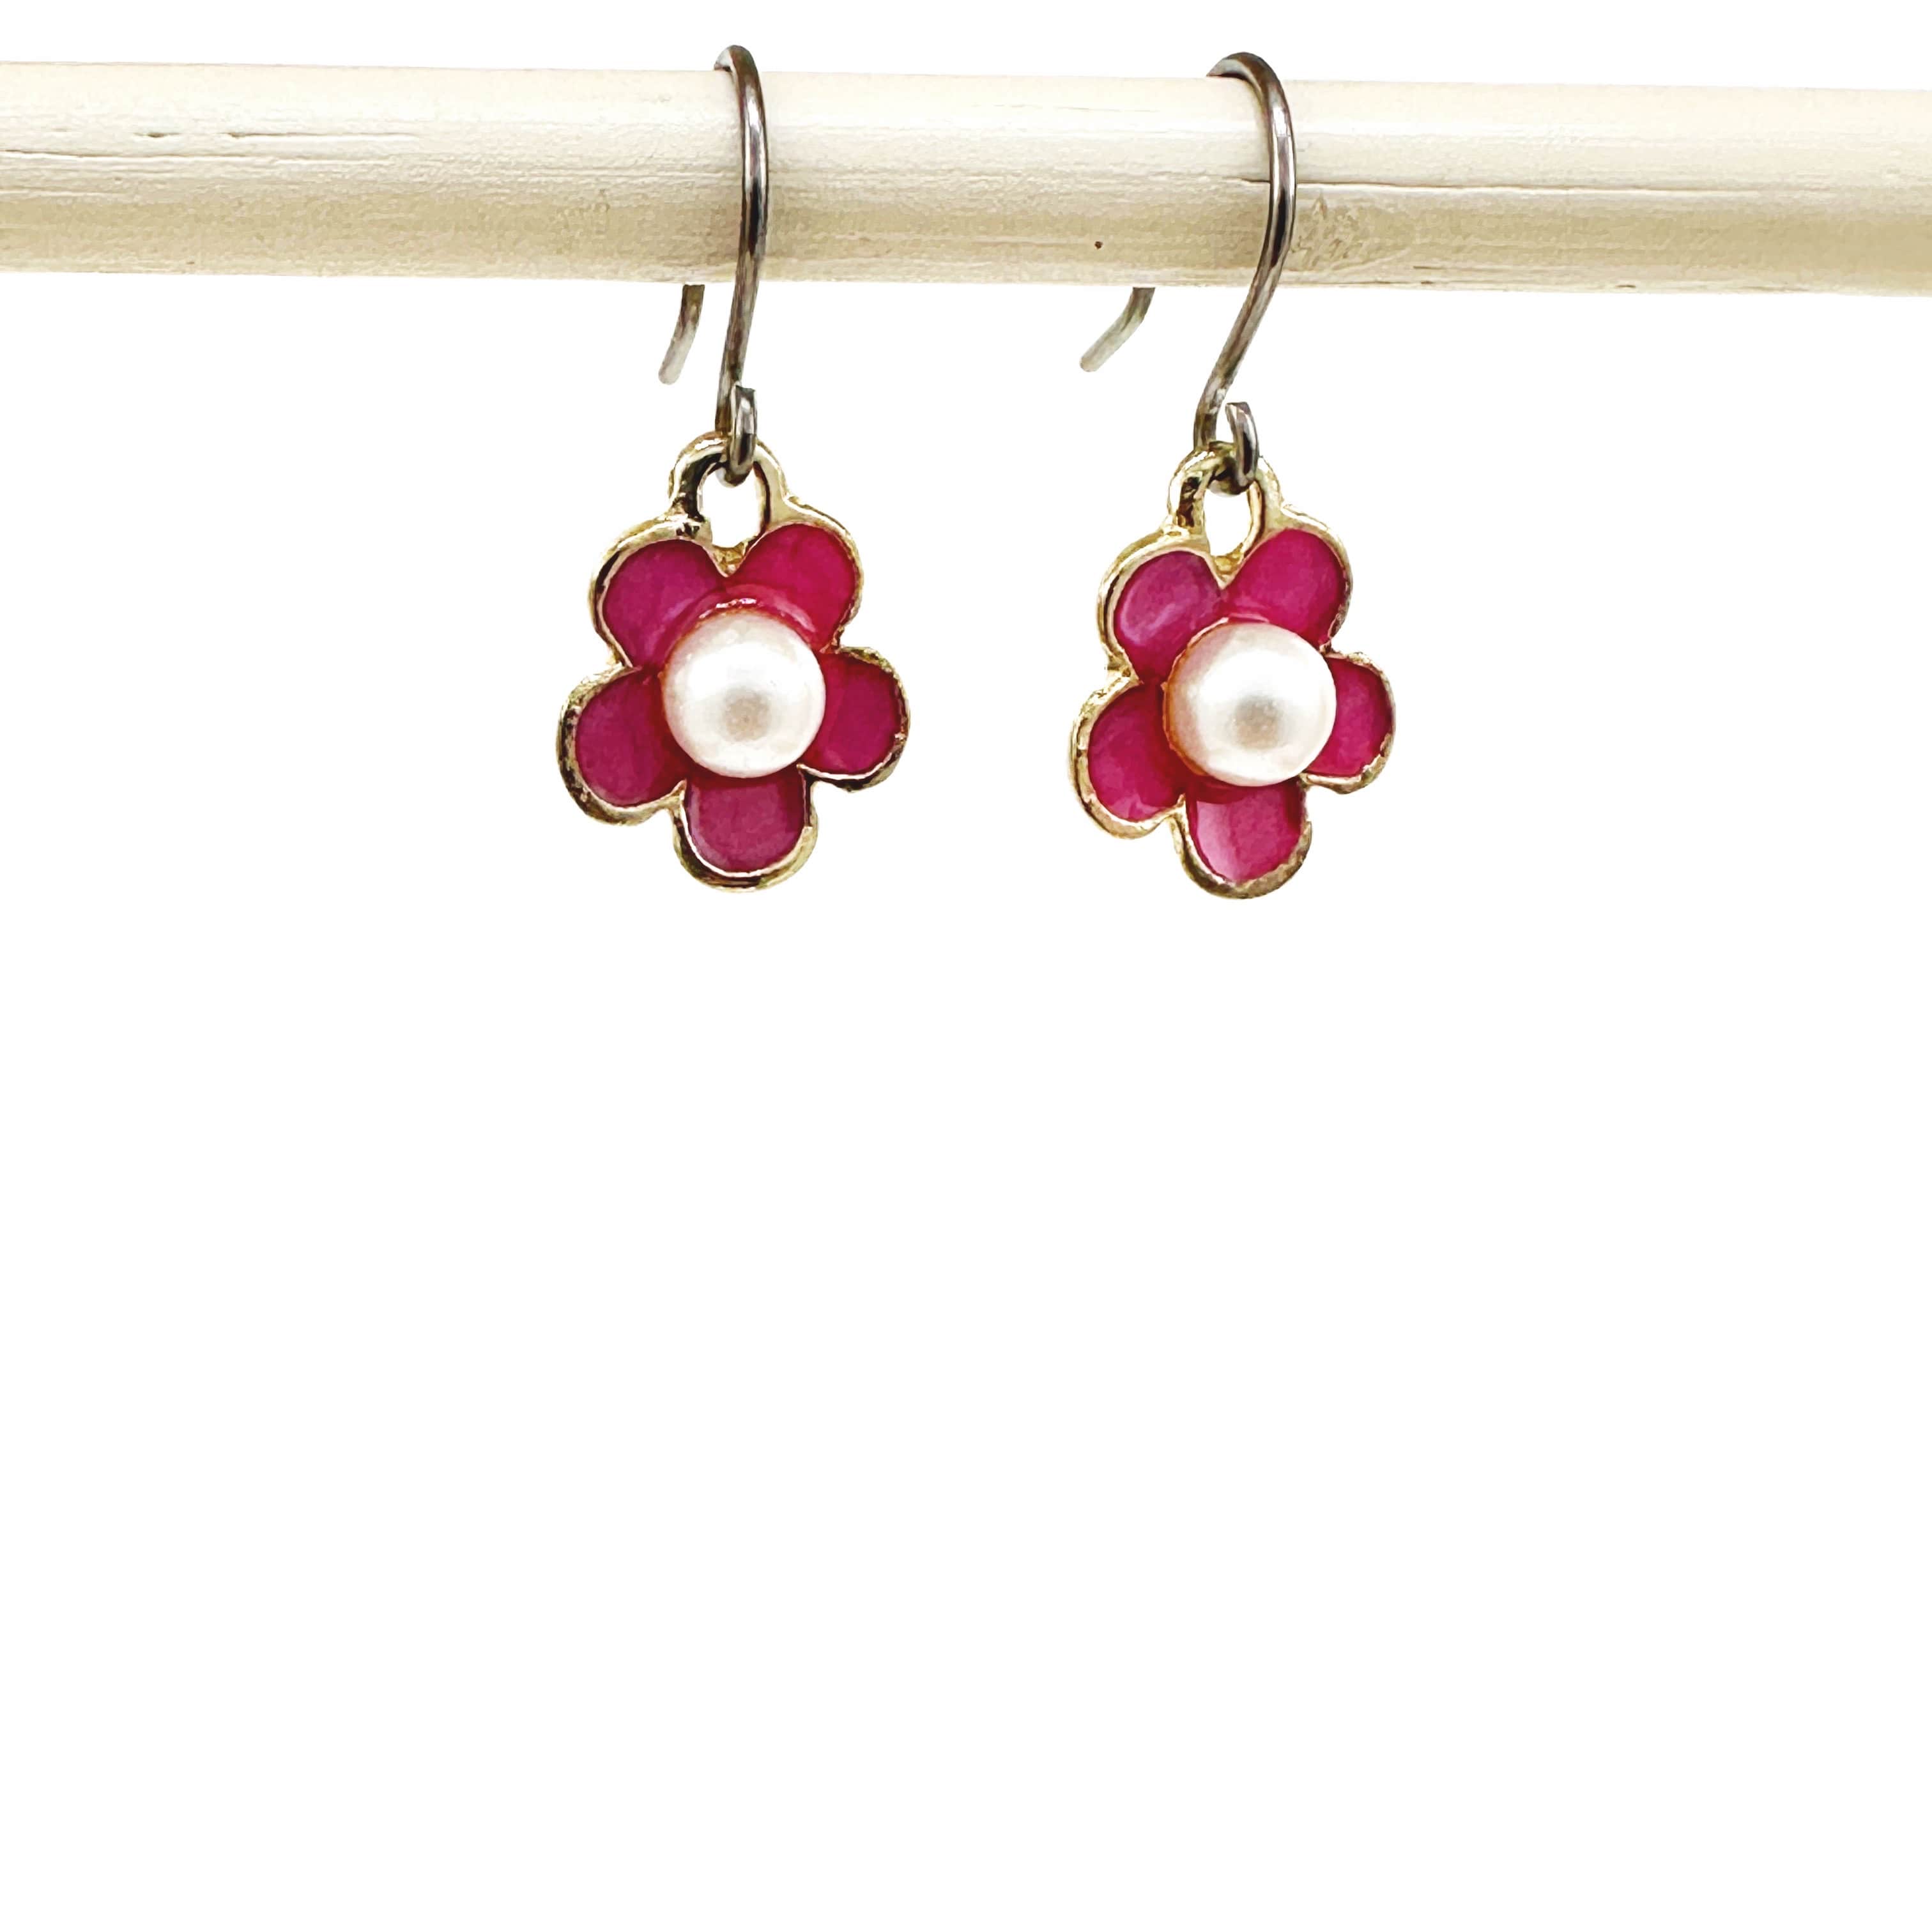 Forget-Me-Not Pink Charm Earrings